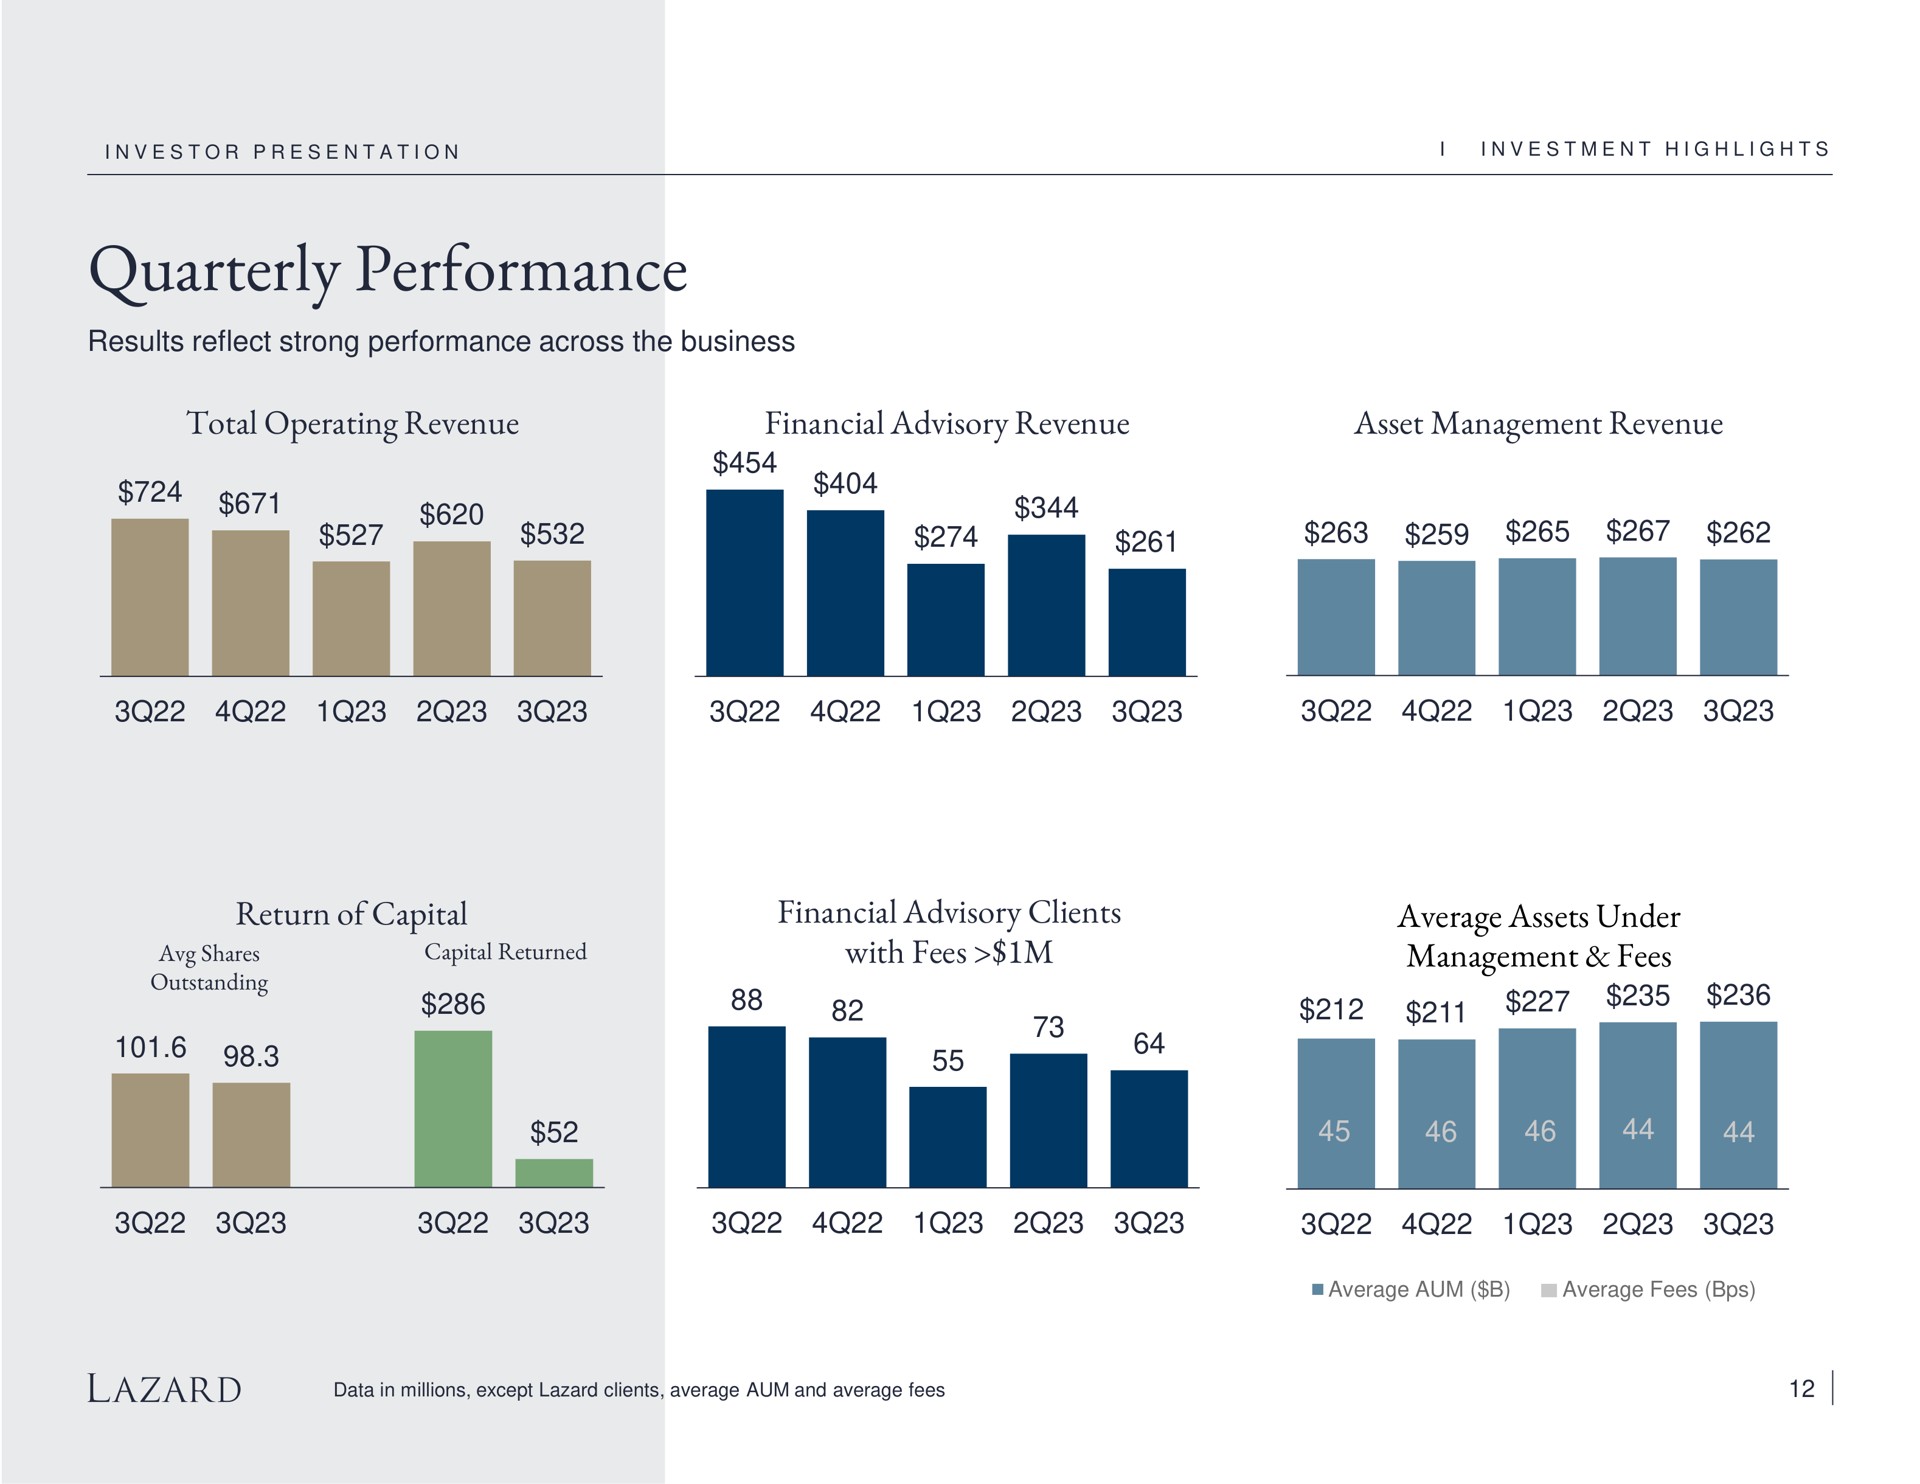 quarterly performance total operating revenue financial advisory revenue asset management revenue return of capital financial advisory clients with fees average assets under management fees | Lazard